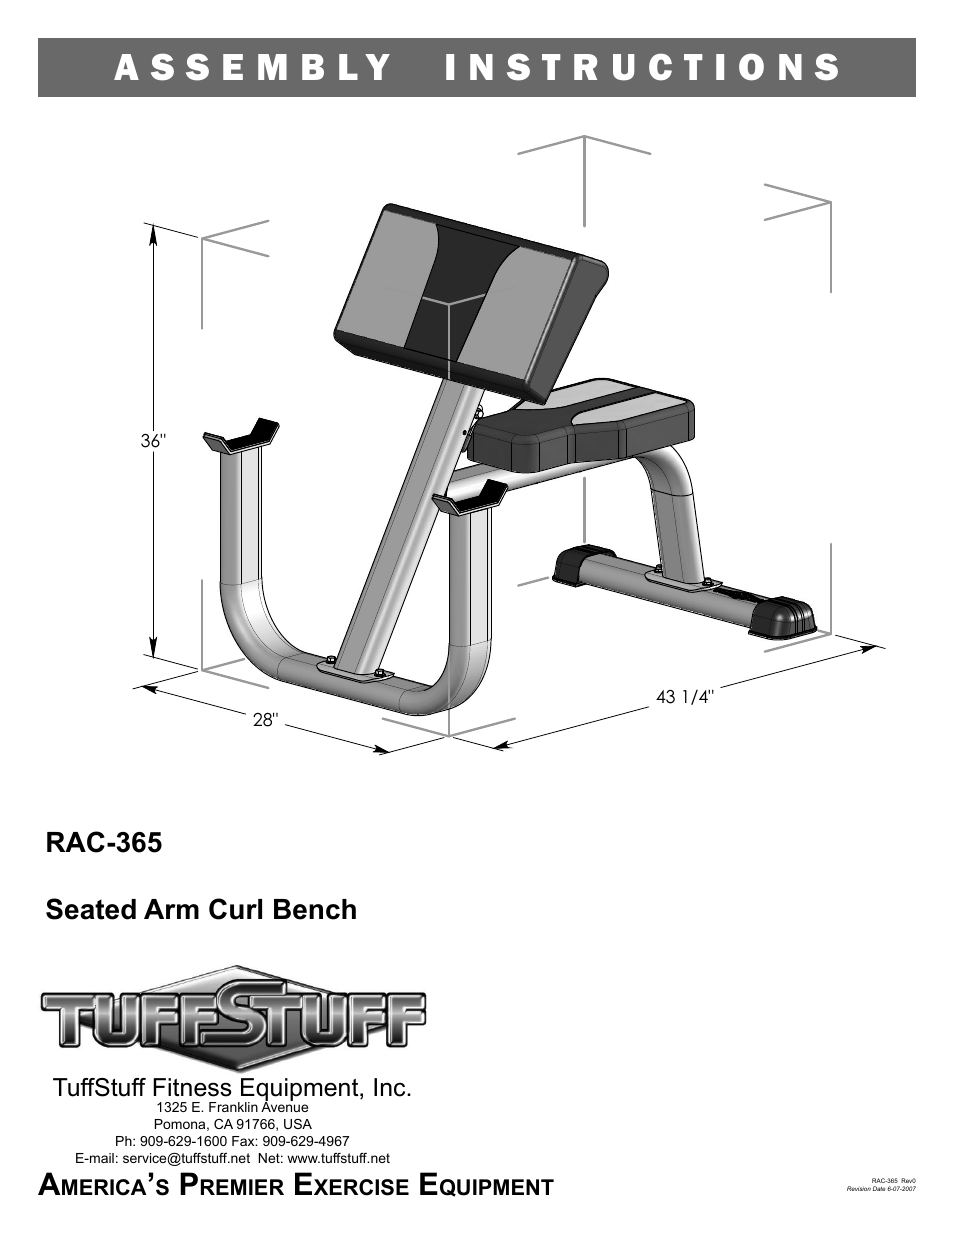 RAC-365 Seated Arm Curl Bench